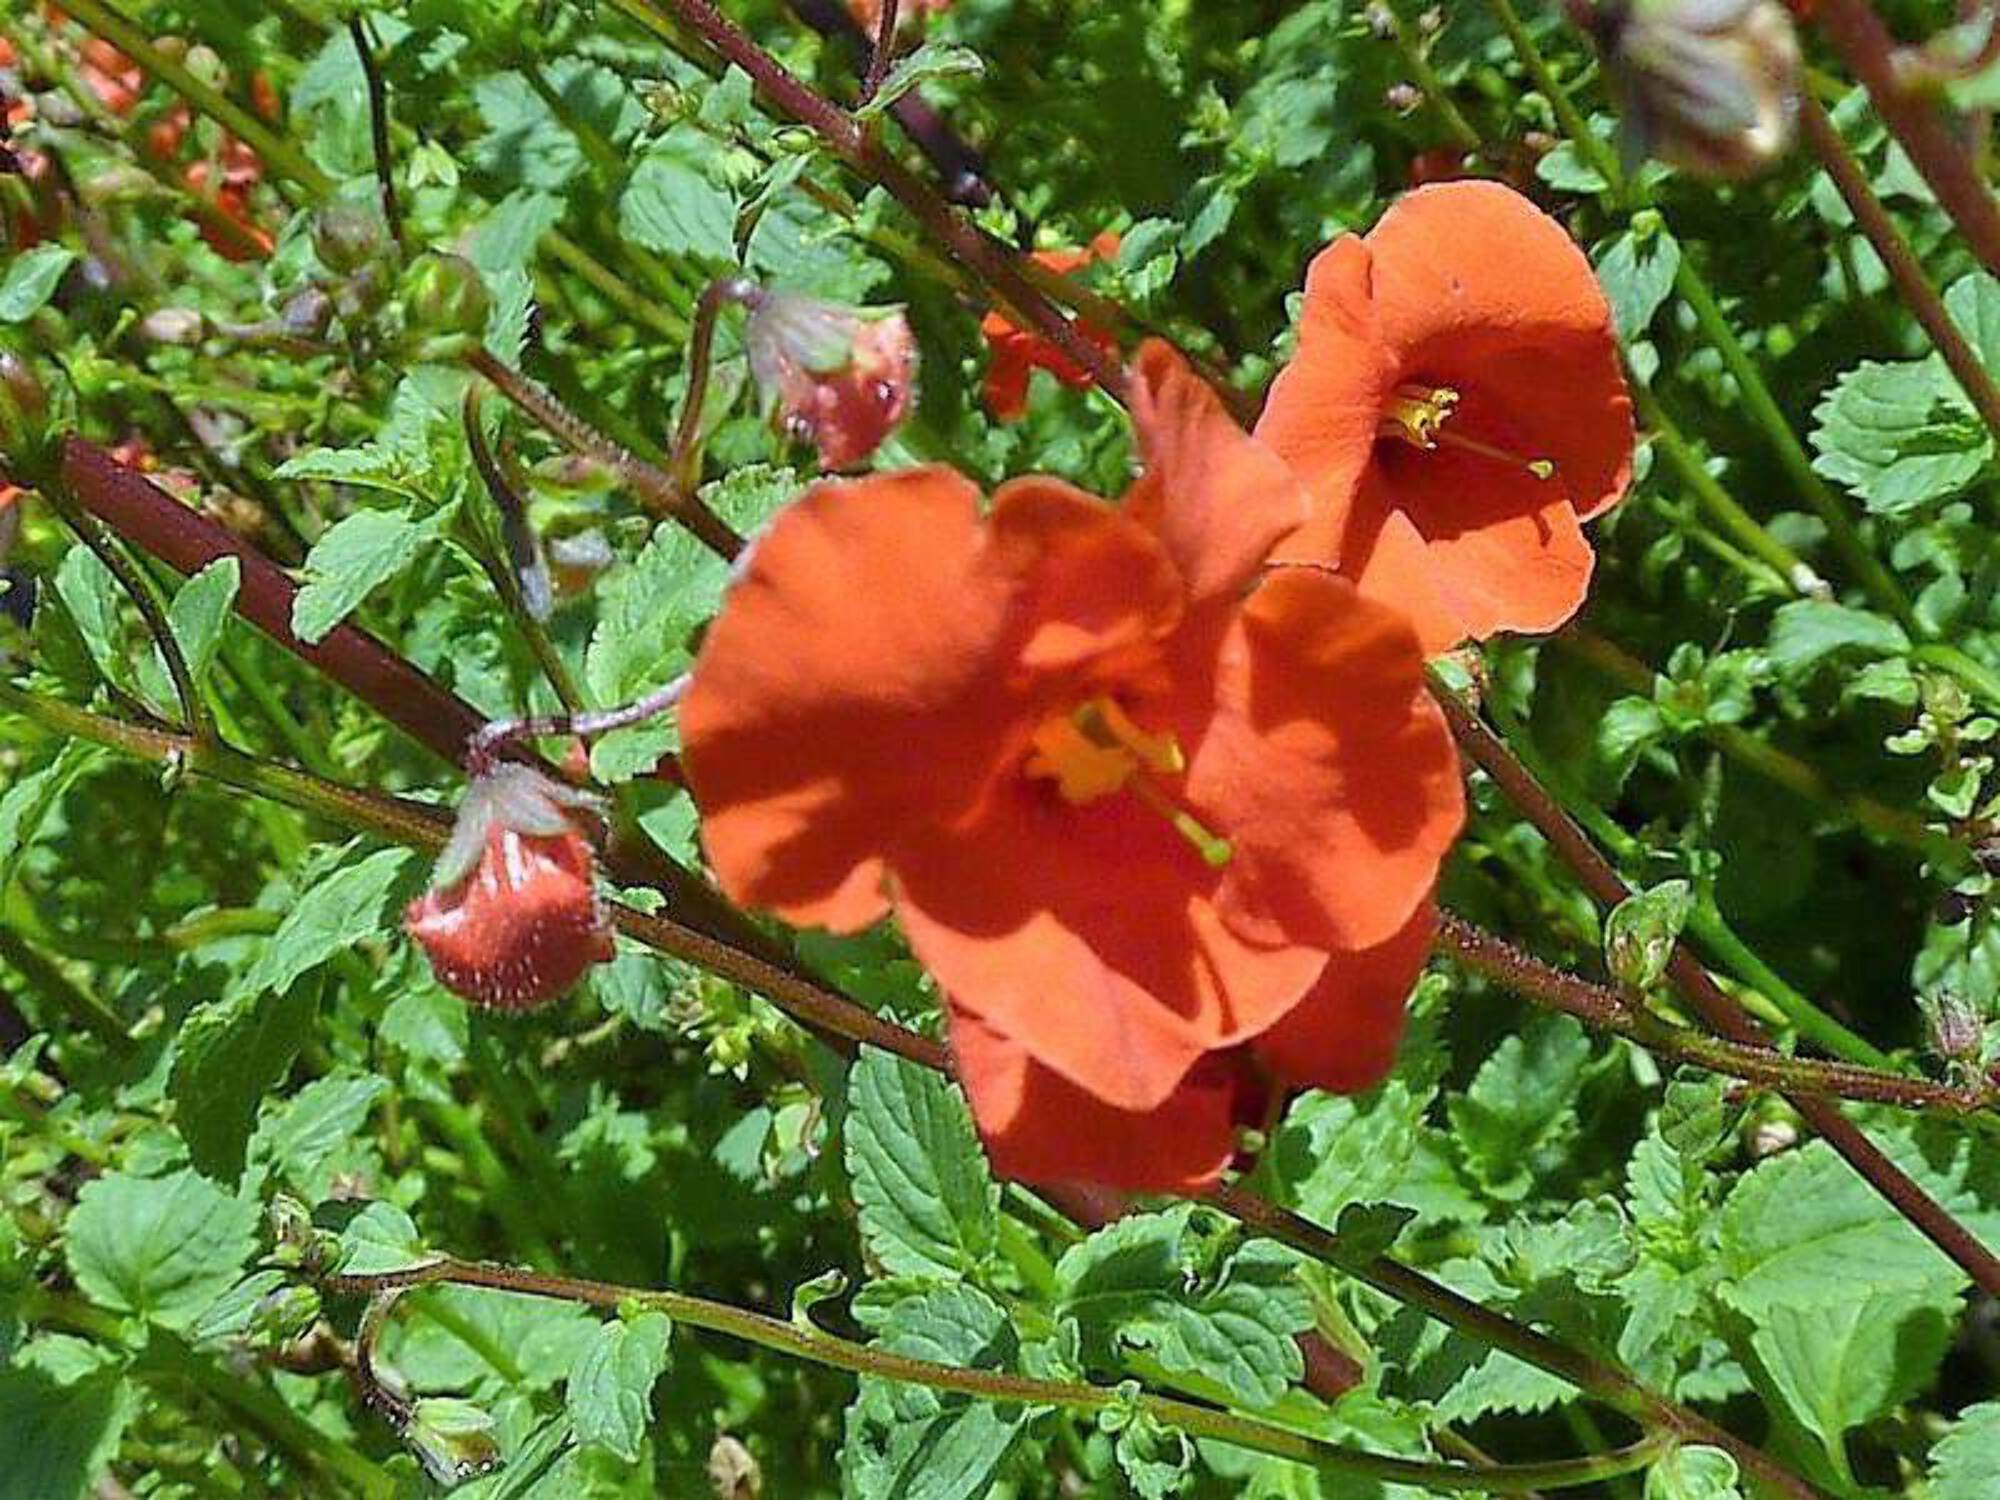 50 SCARLET MASK FLOWER Hummingbird Plant Red Alonsoa Warscewiczii Seeds - image 3 of 4